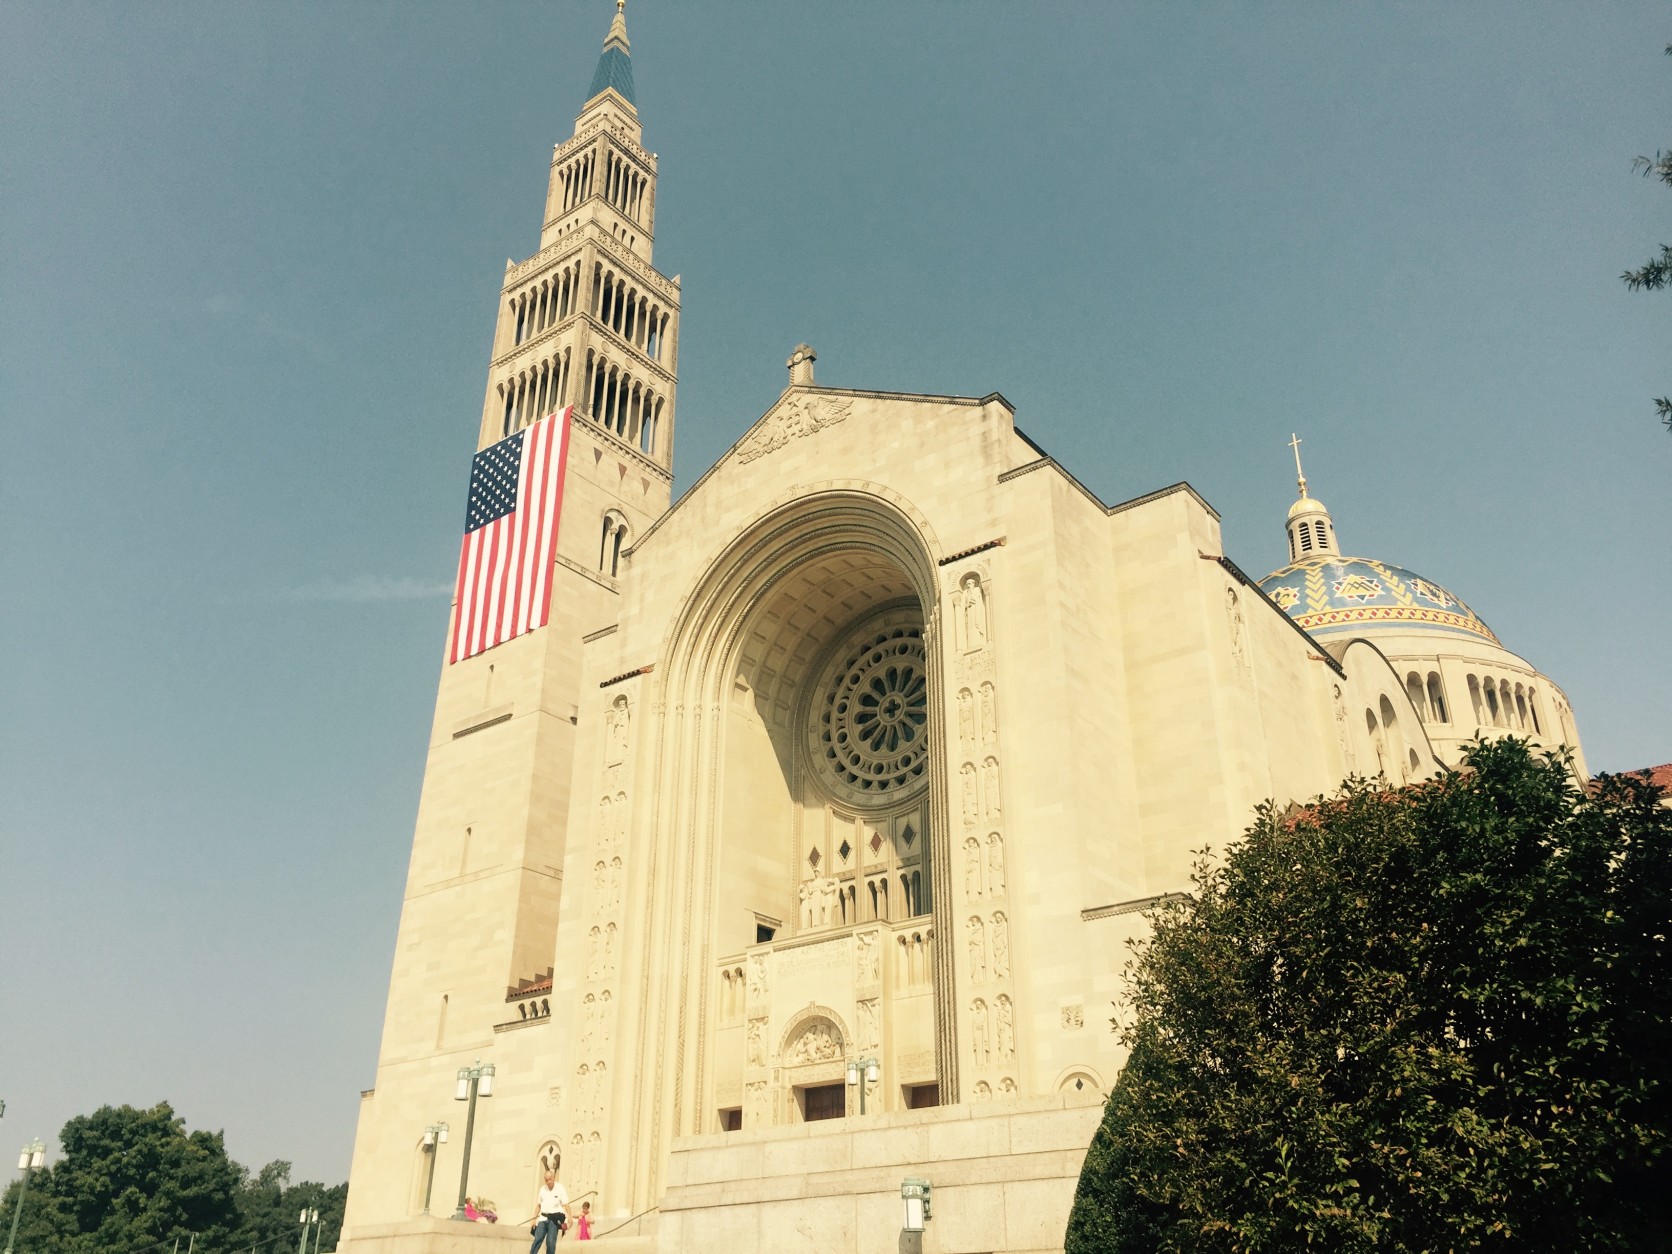 The pope will be visiting the  Basilica of the National Shrine of the Immaculate Conception during his visit to D.C. (WTOP/Max Smith)